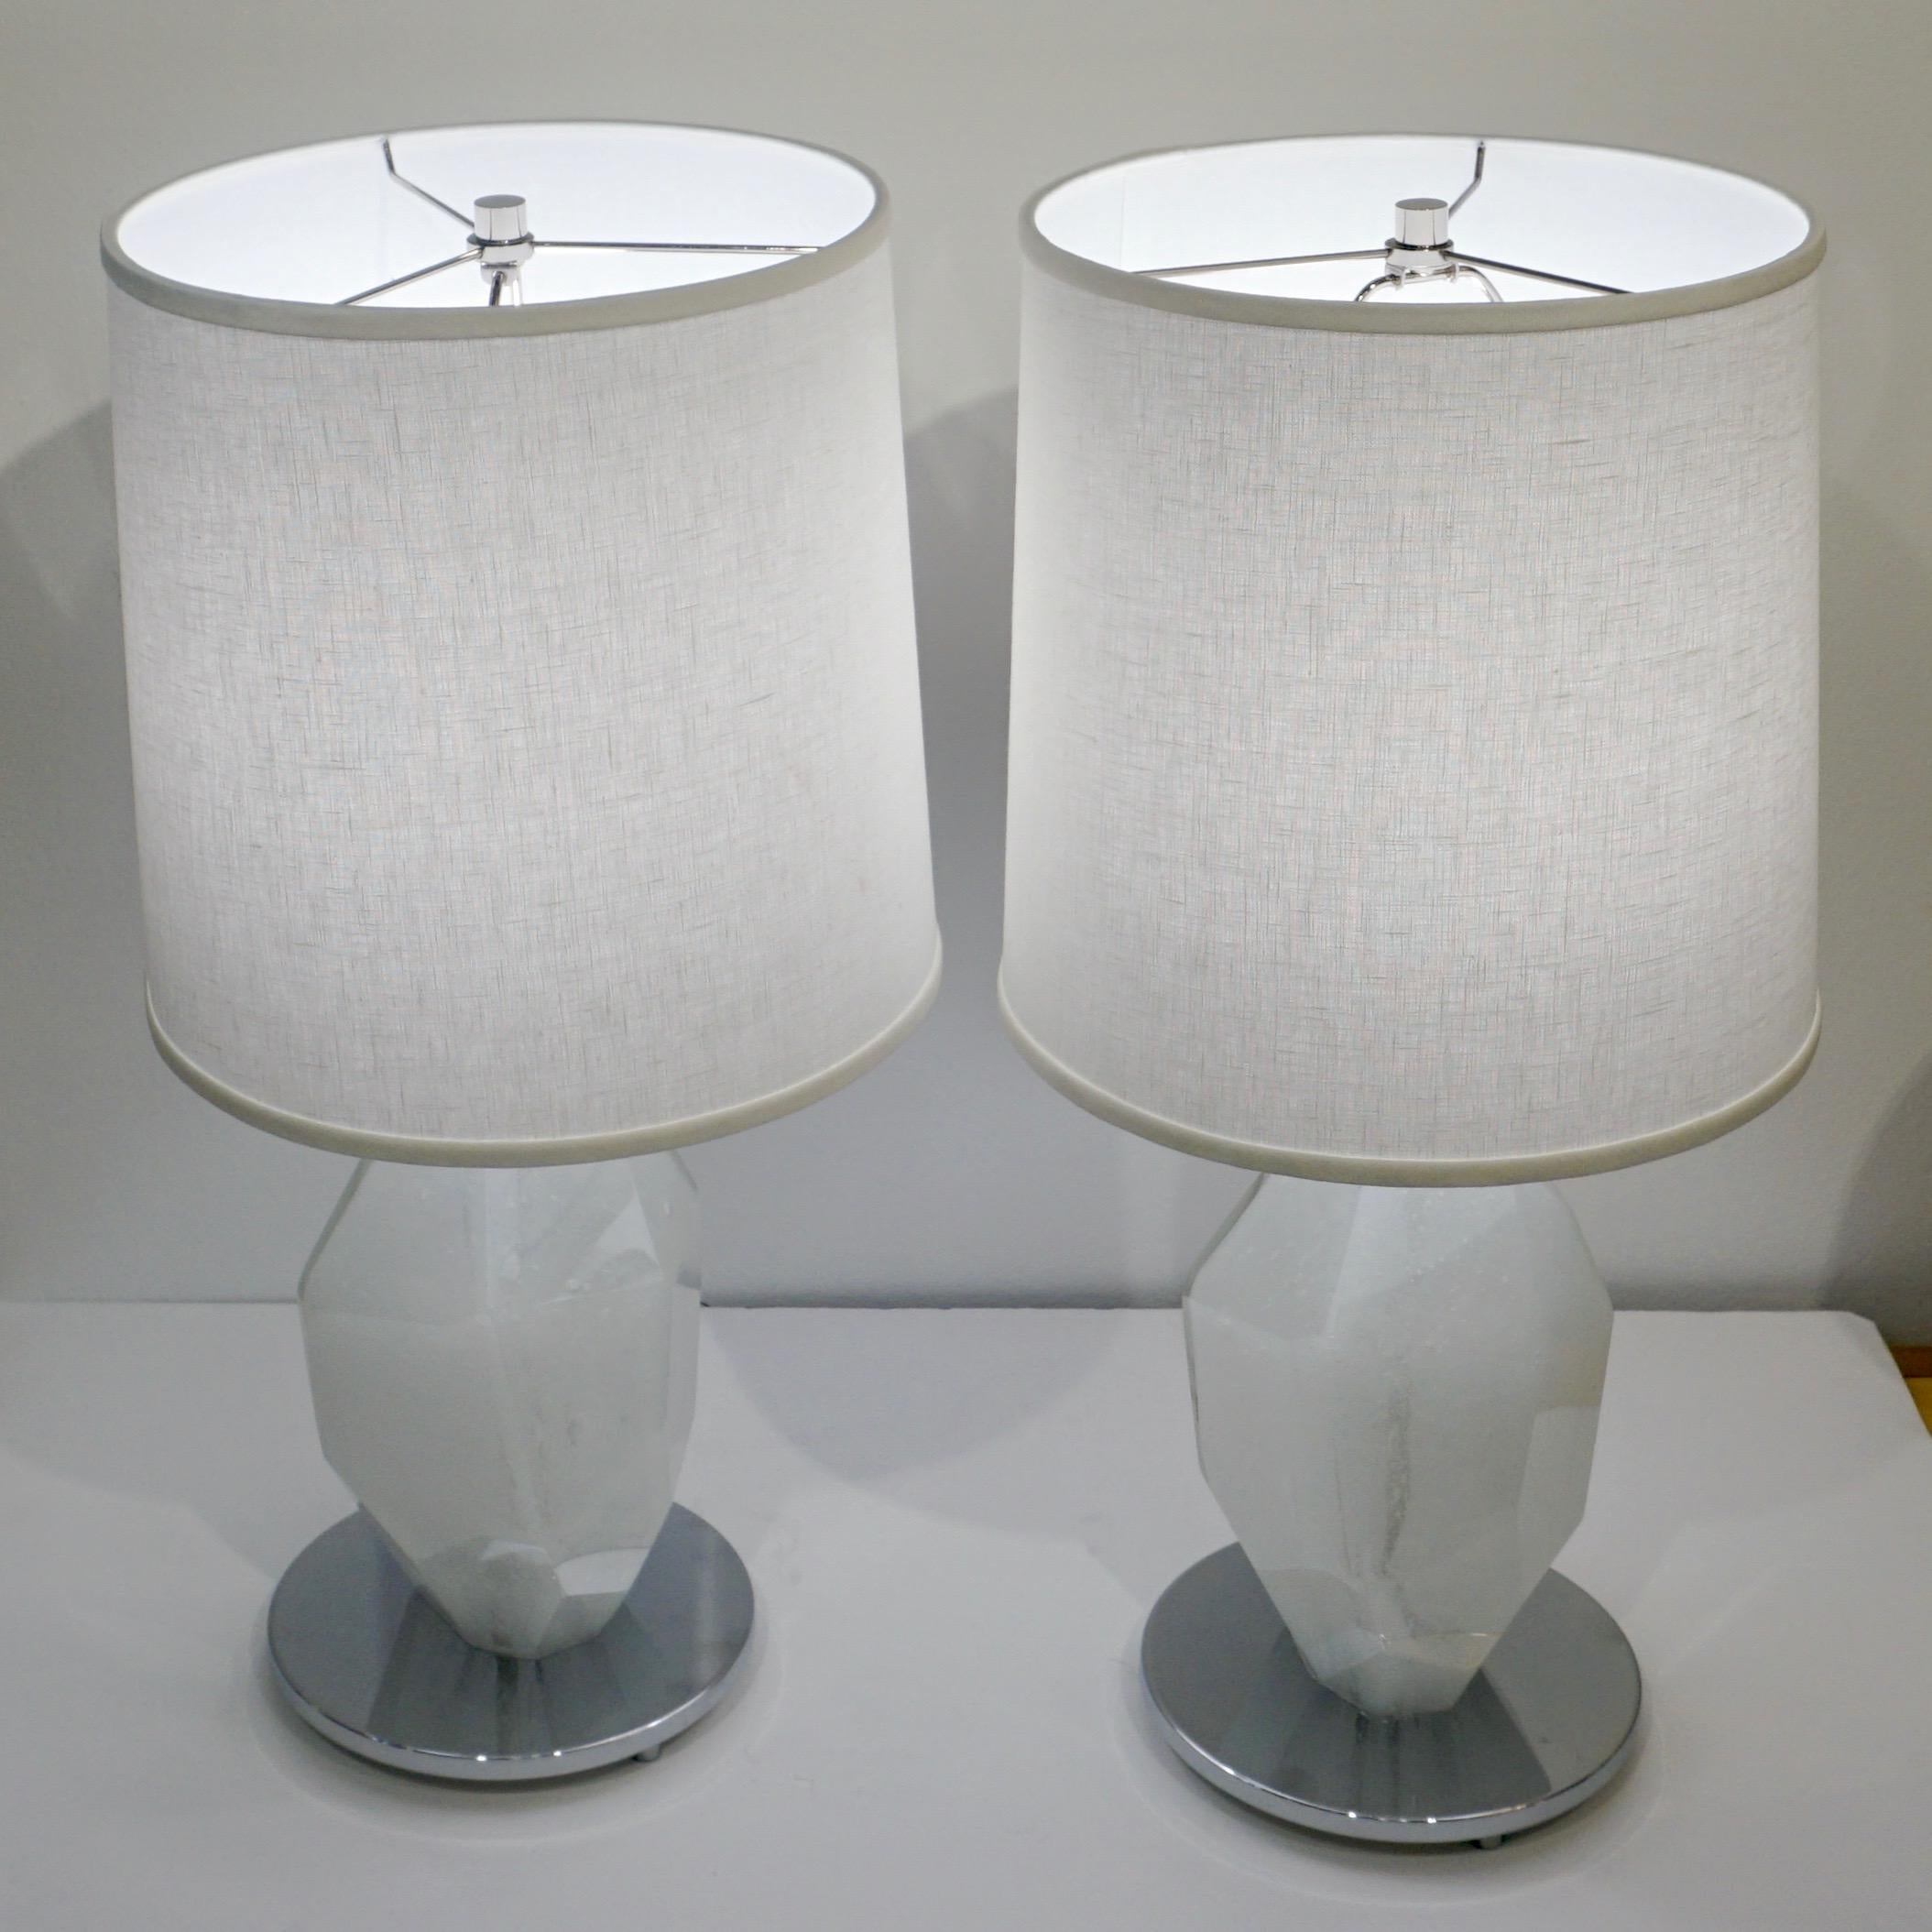 Donà Contemporary Italian Pair of Faceted Solid Rock White Murano Glass Lamps 1